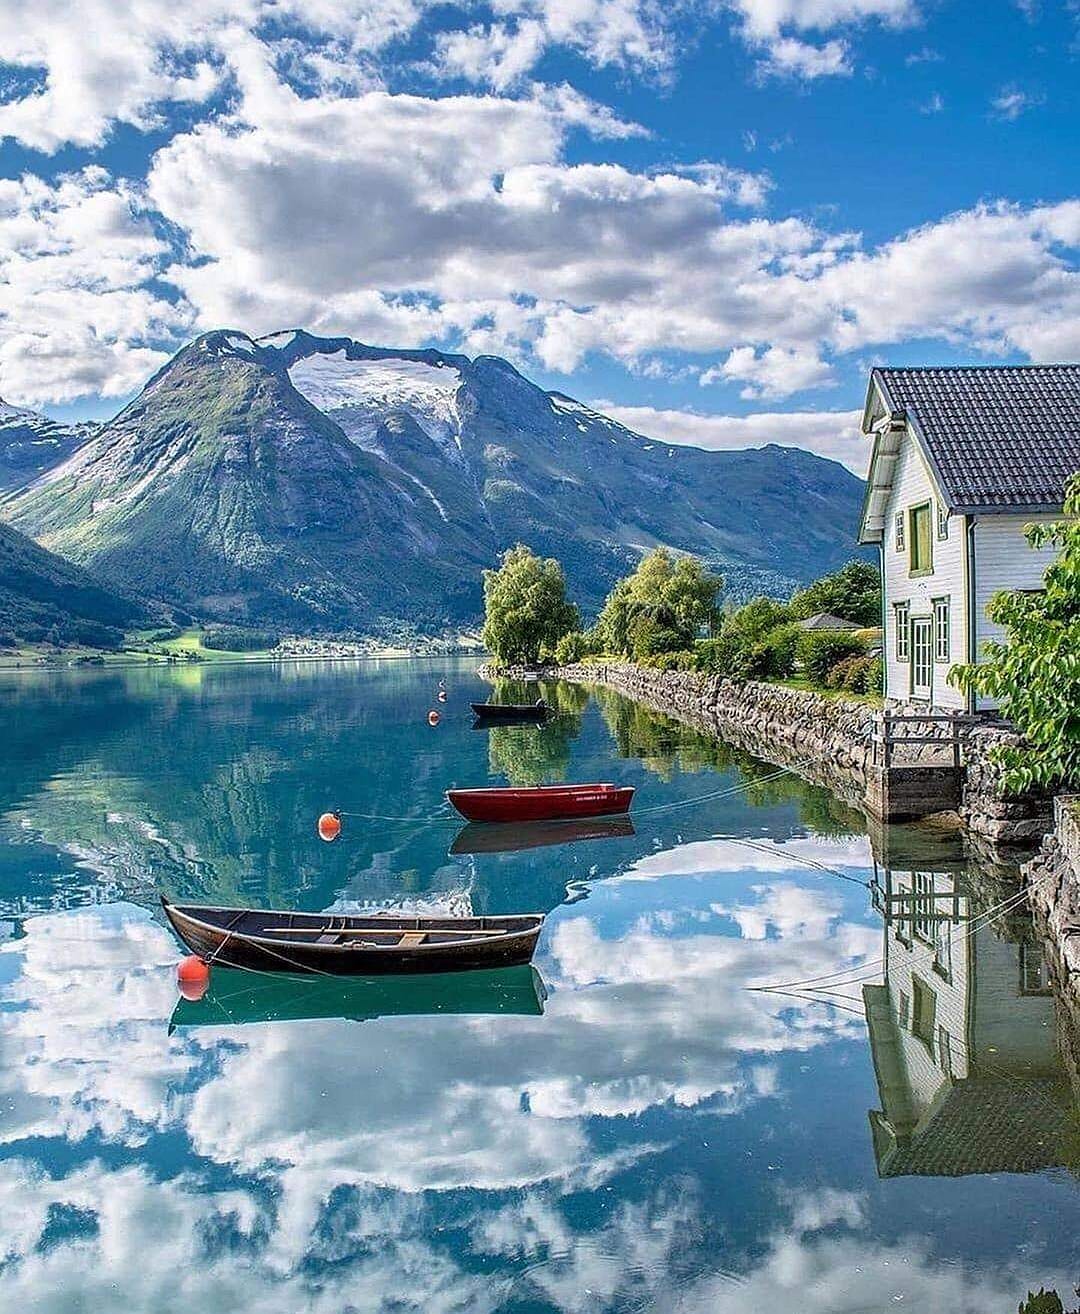 Welcome to Hjelle, Norway.